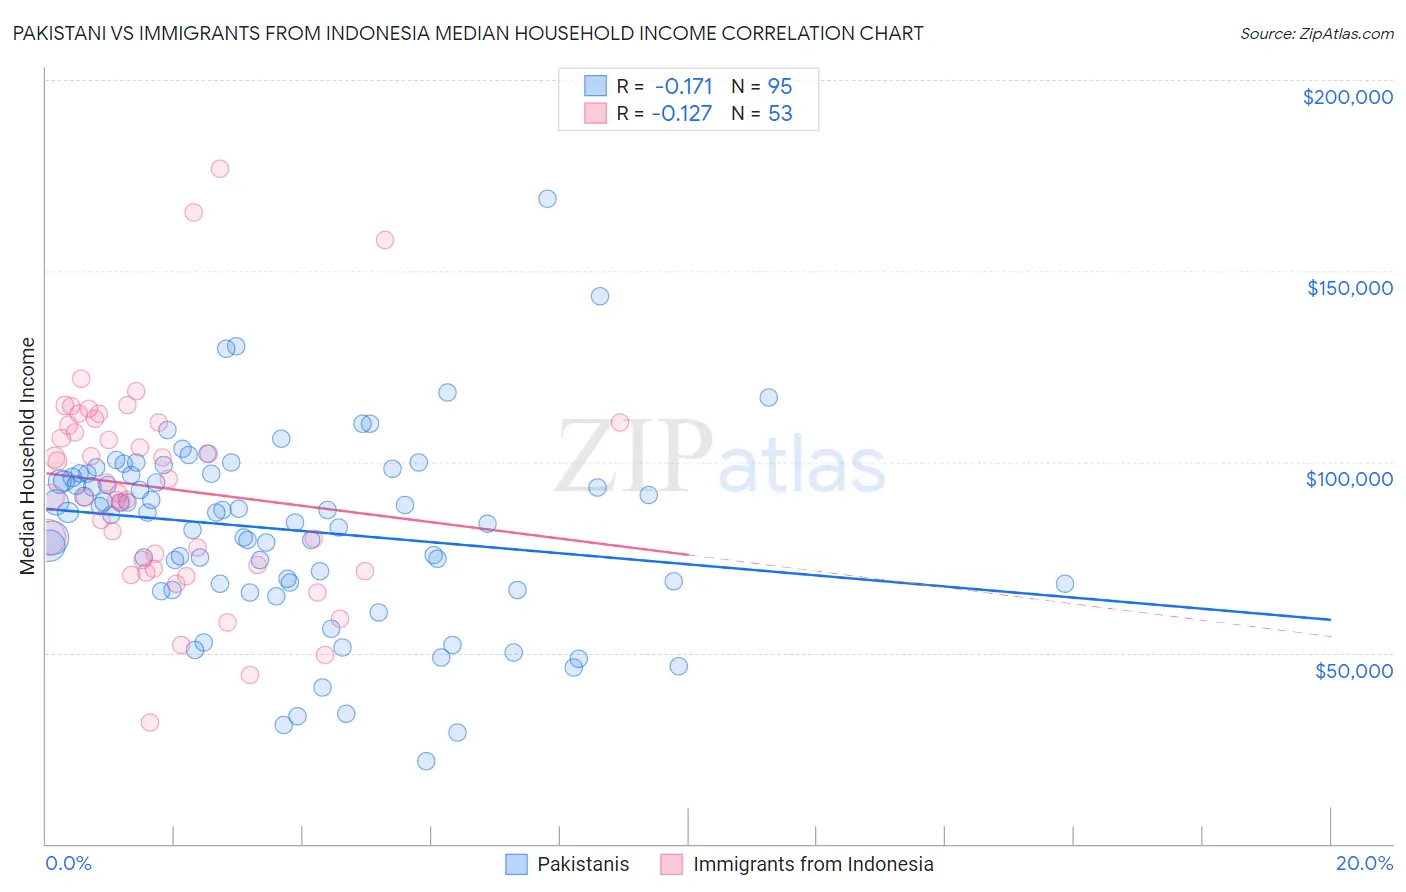 Pakistani vs Immigrants from Indonesia Median Household Income